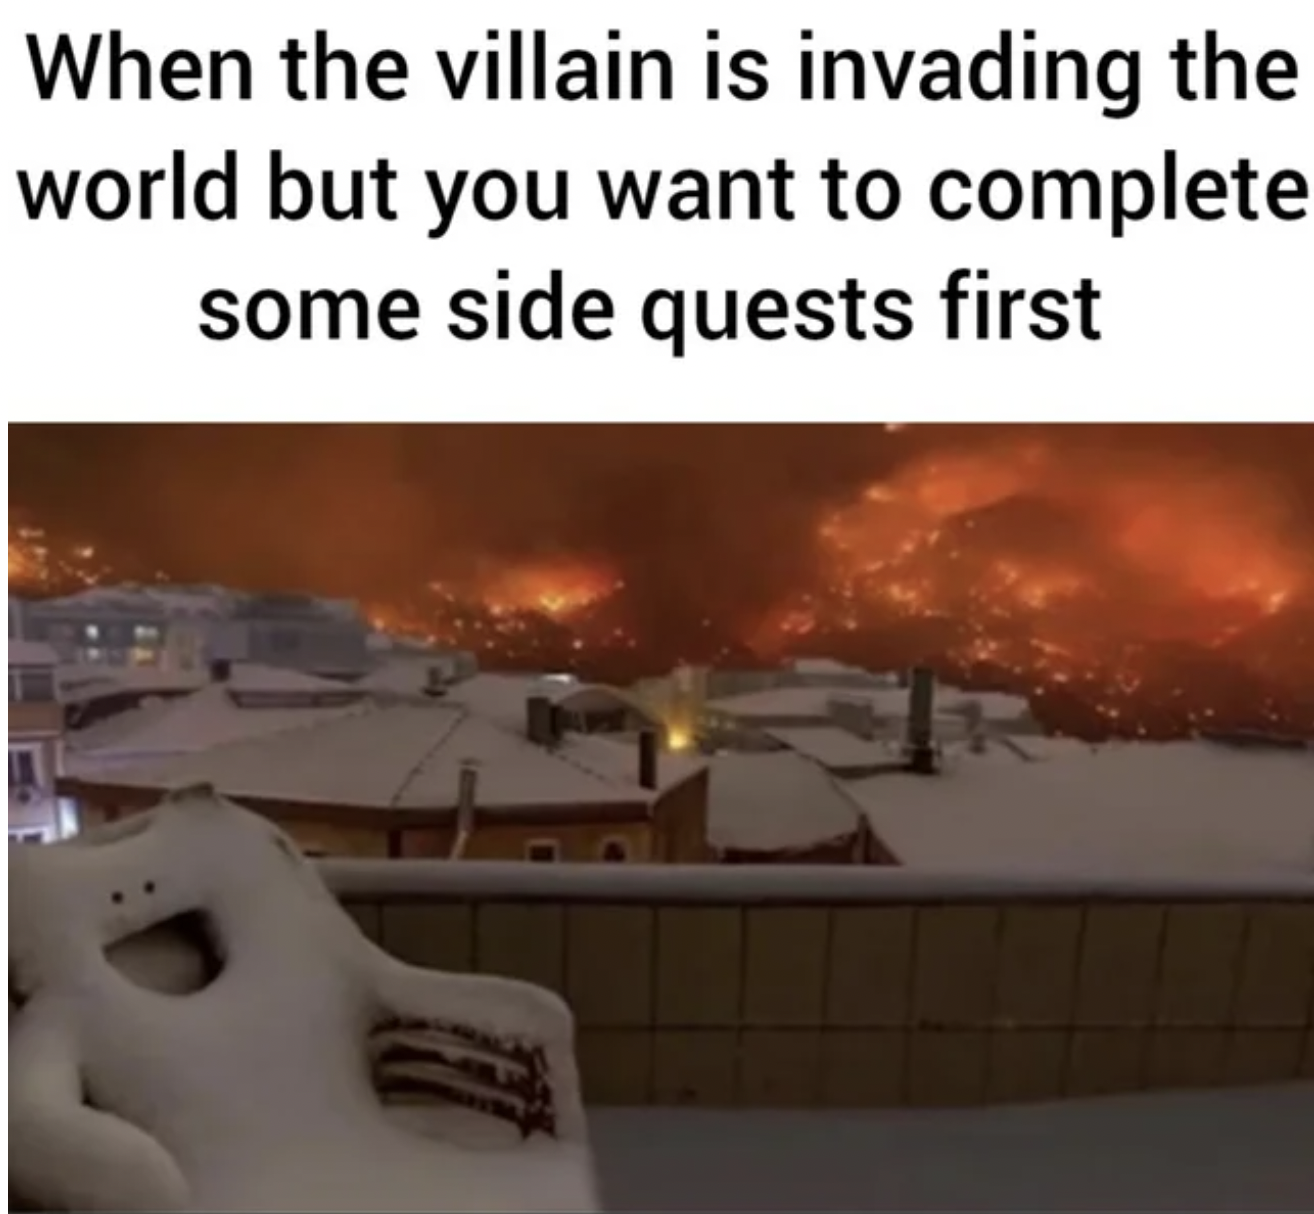 Gaming memes - happy chair meme template - When the villain is invading the world but you want to complete some side quests first